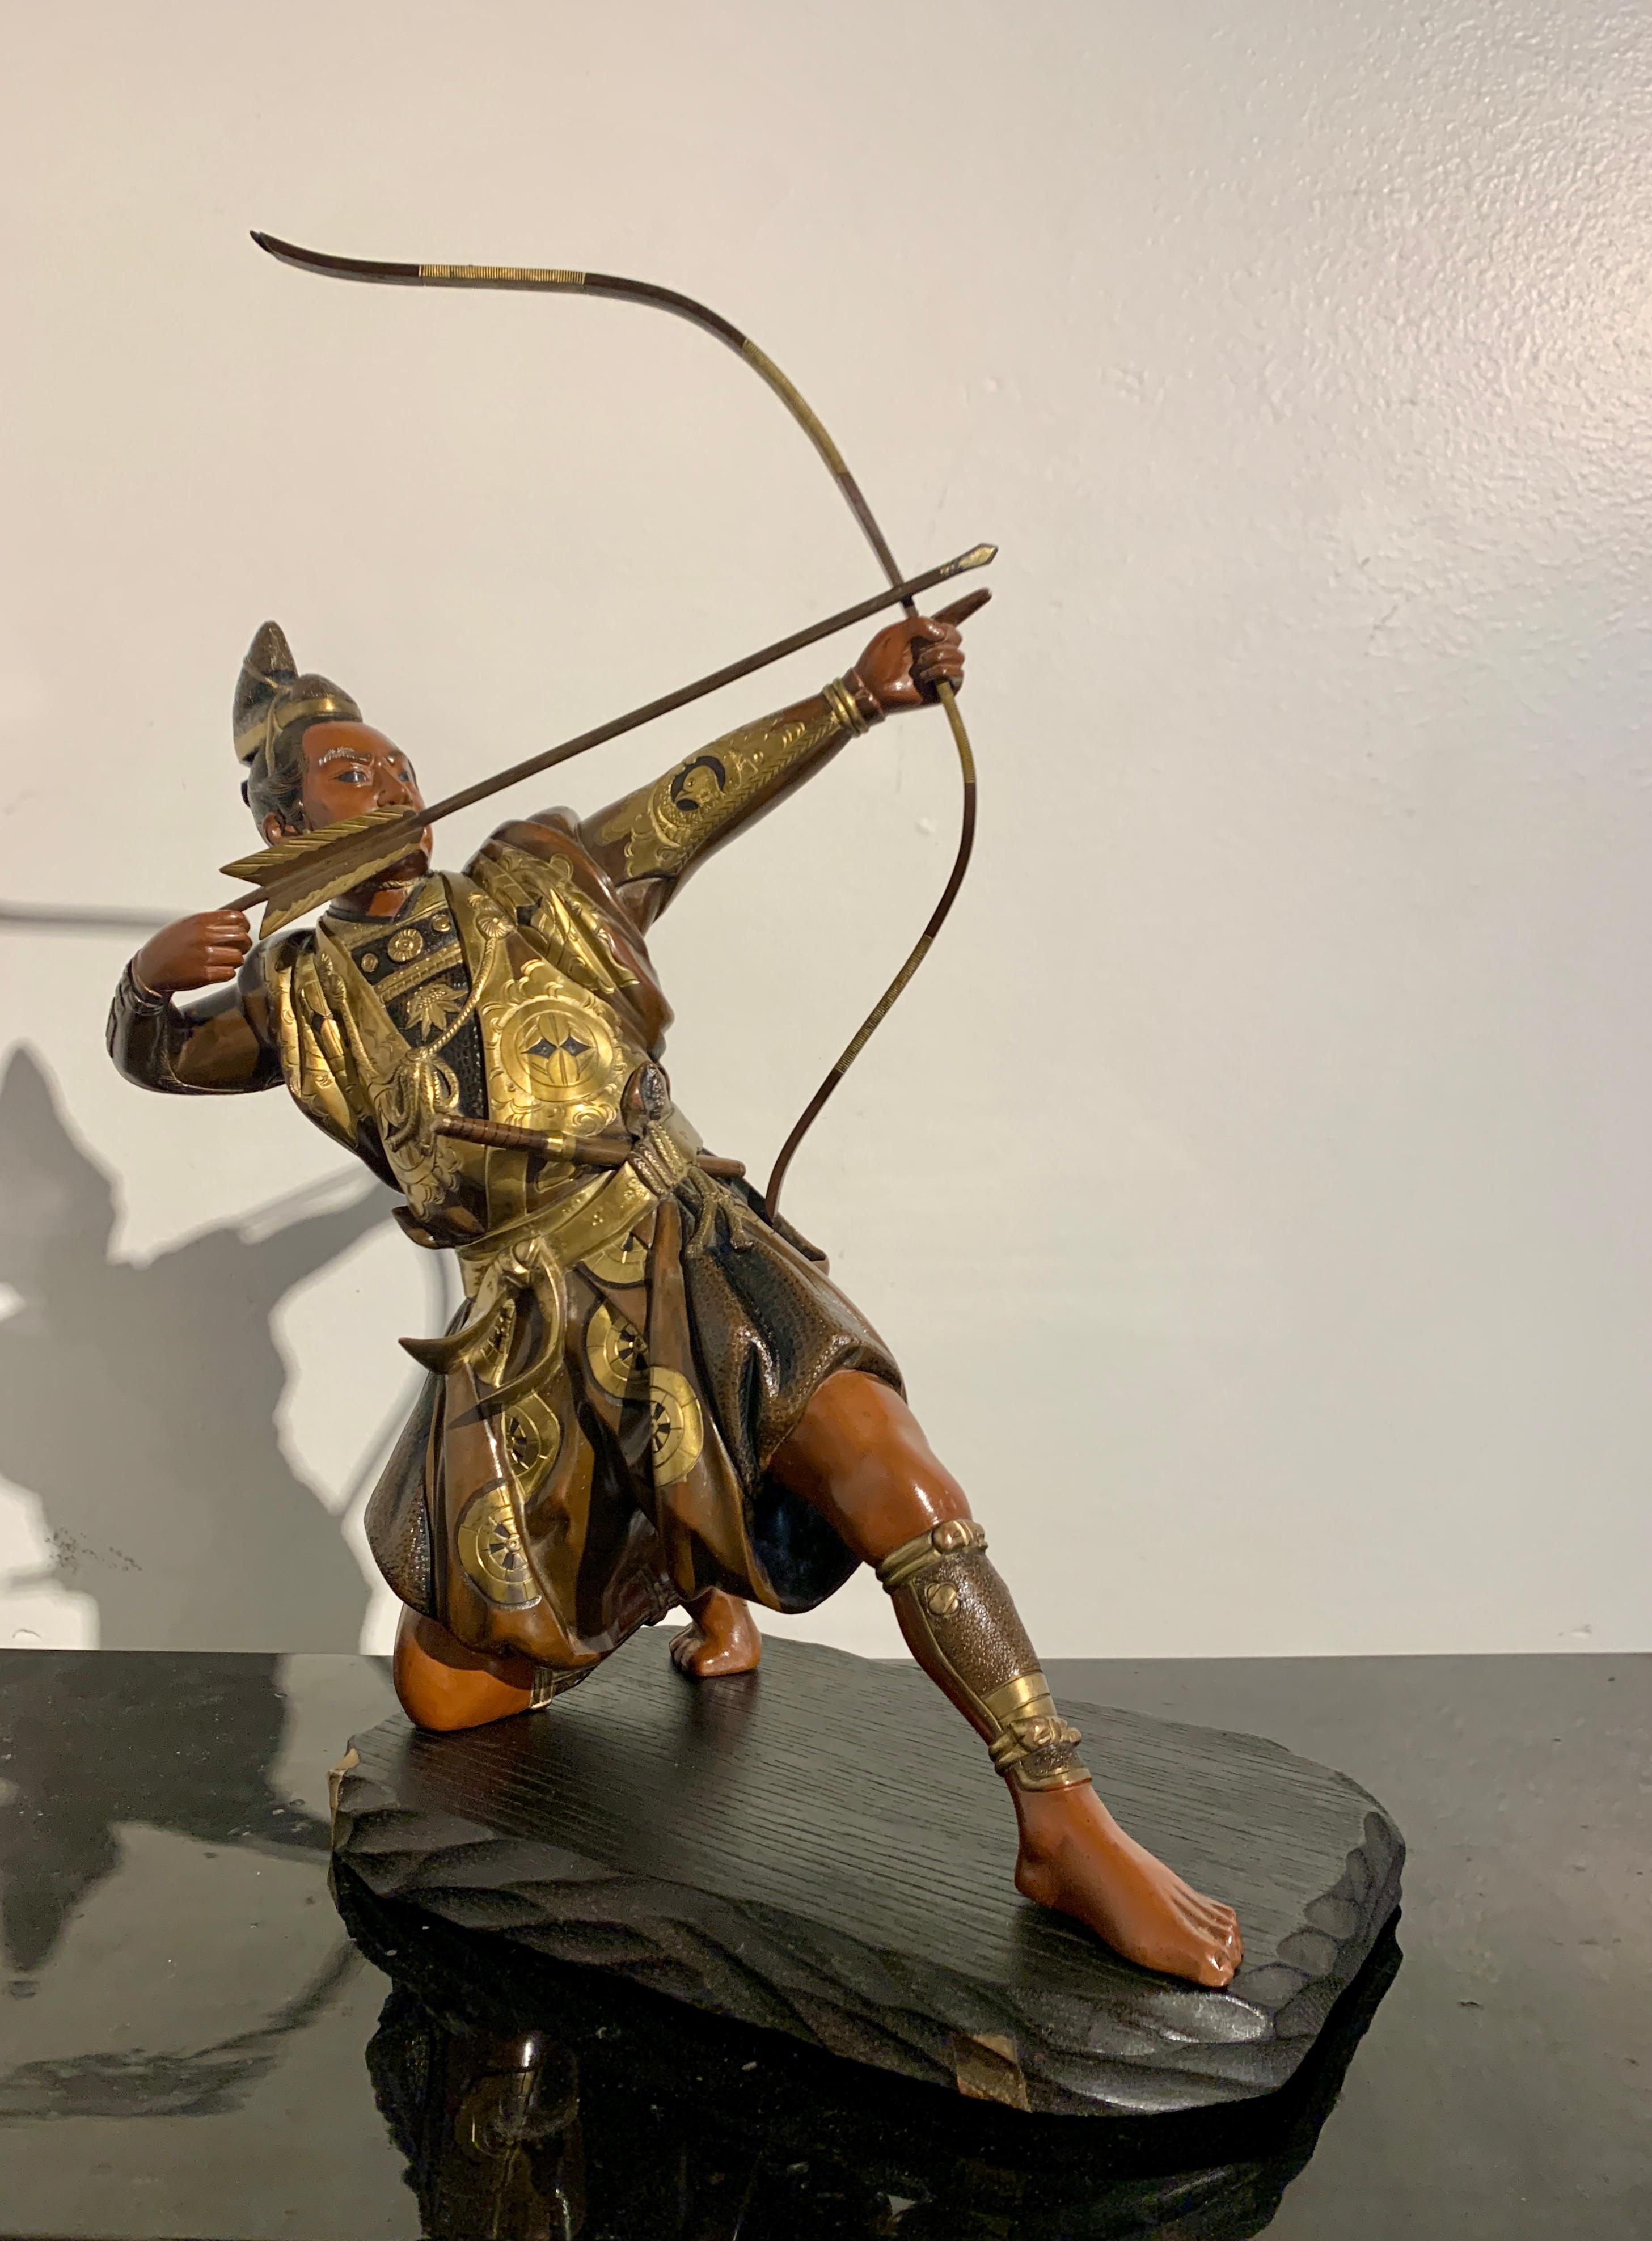 A spectacular Japanese cast, carved, and parcel gilt bronze sculpture, okimono, of a kneeling samurai archer, signed Kiyotsugu (died 1894), Meiji Period, circa 1880, Japan.

The bold and dramatic sculpture depicts a kneeling samurai archer with